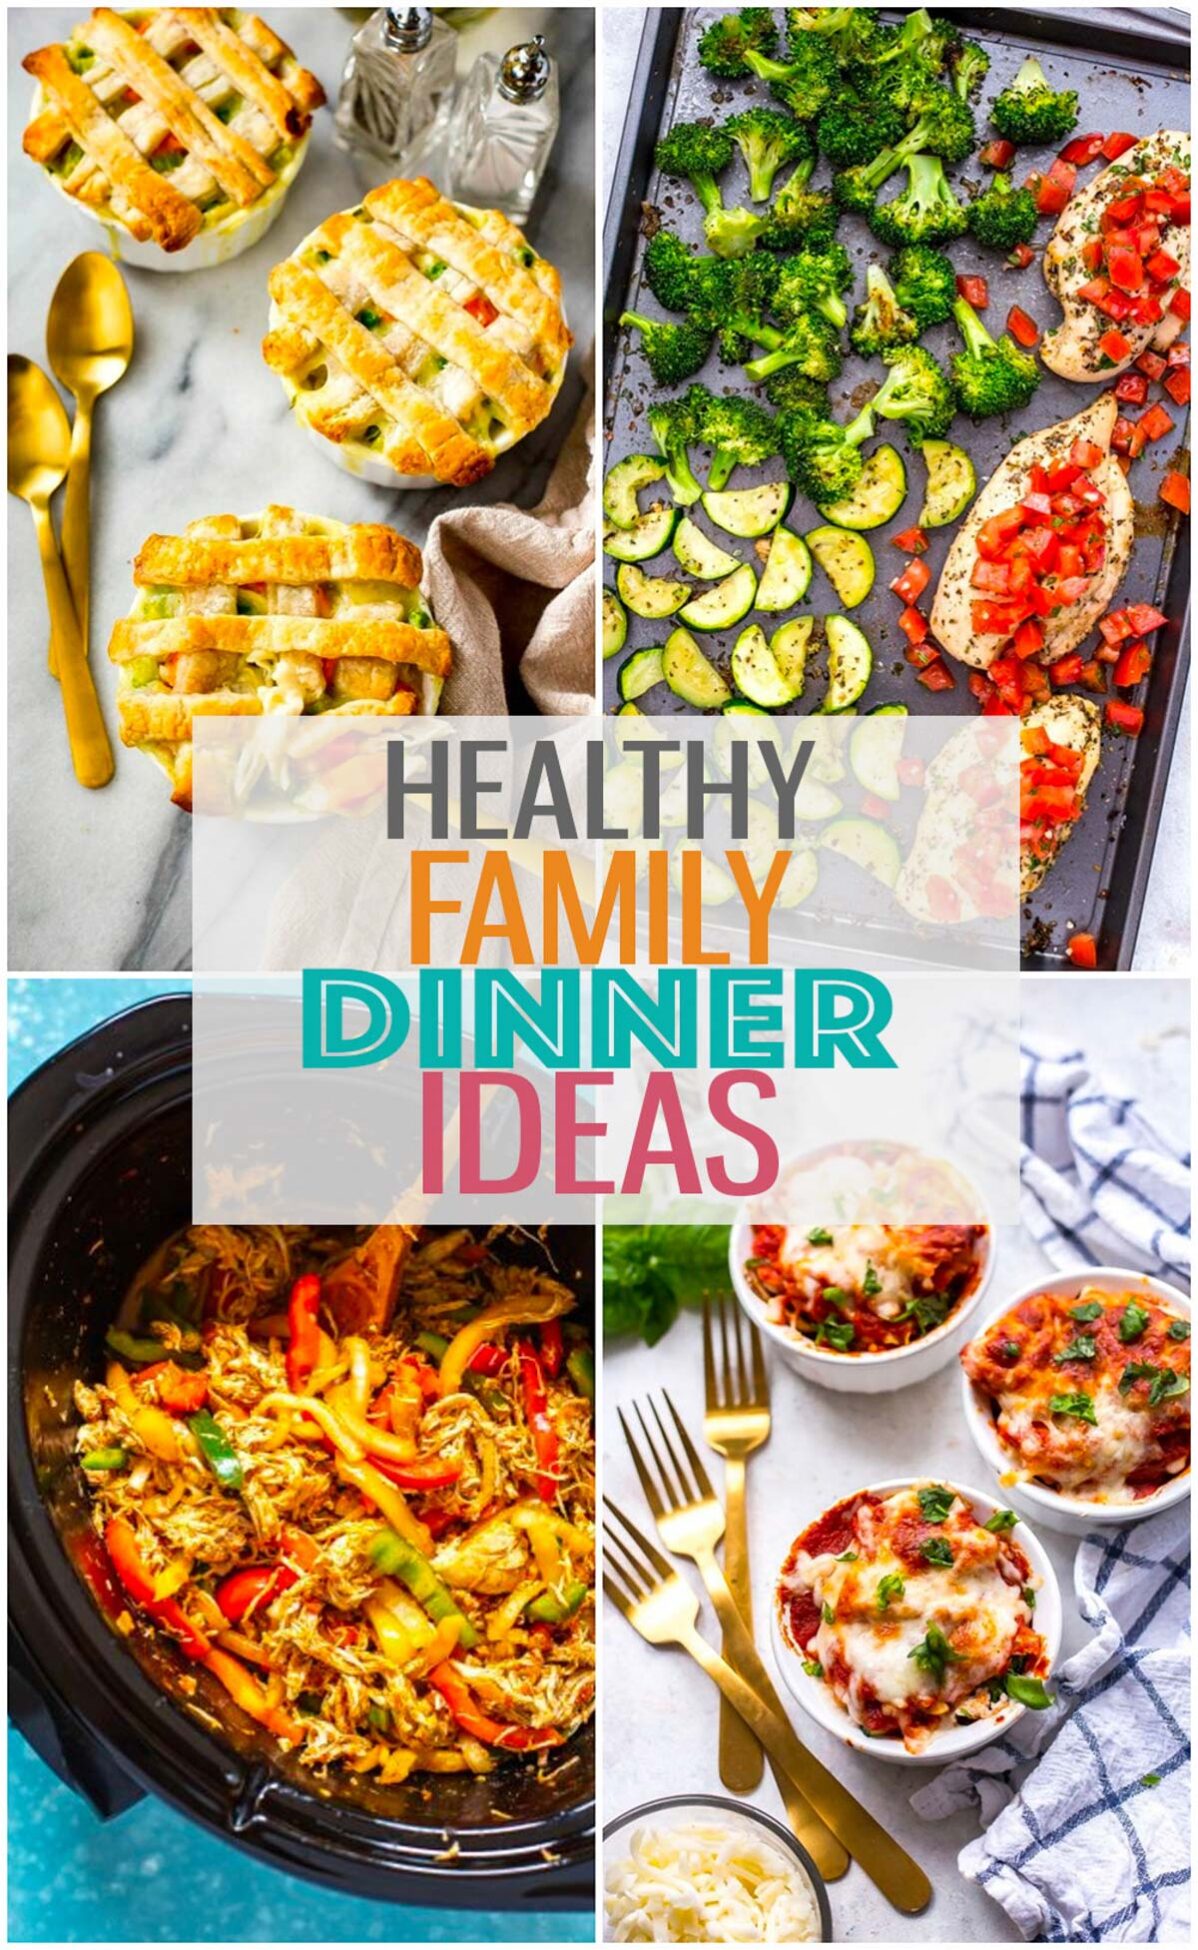 A collage featuring four different meals with the text "Healthy Family Dinner Ideas" layered over top.